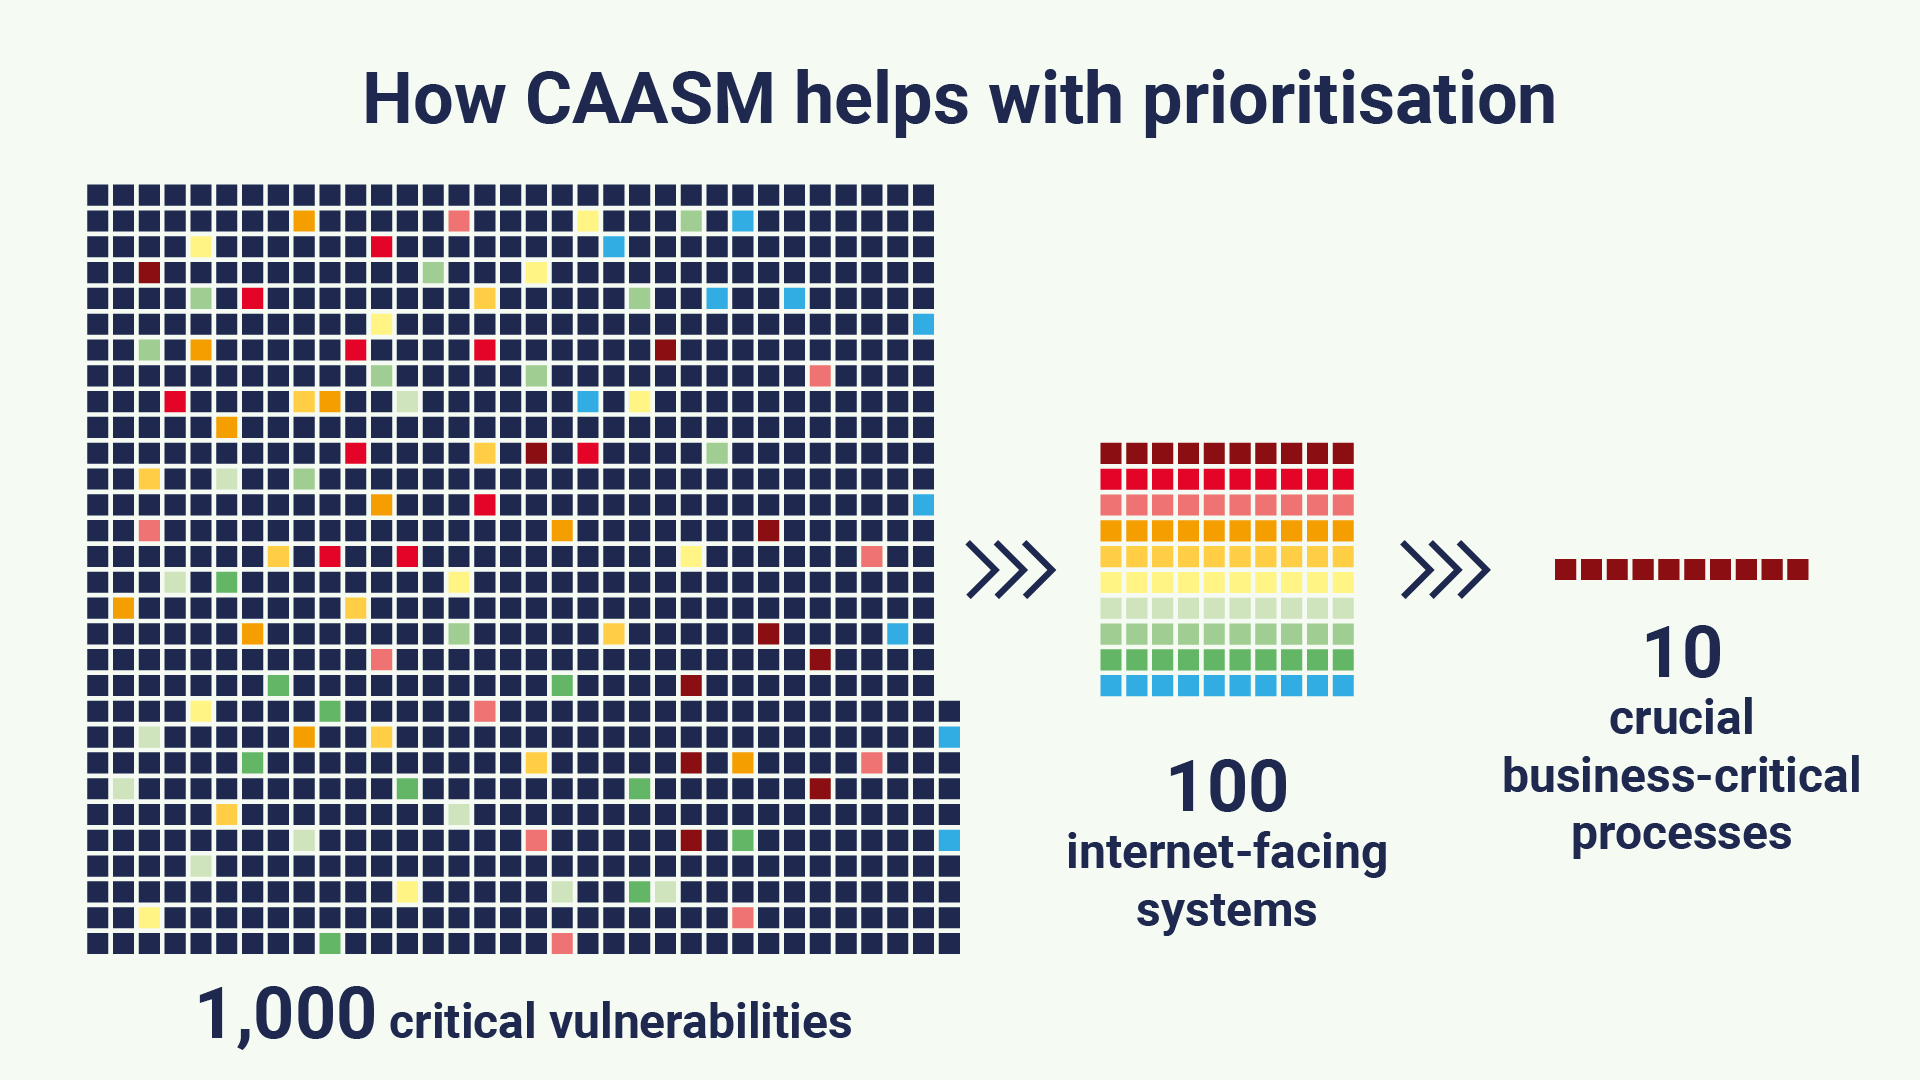 Graphic showing how CAASM helps with vulnerability prioritisation